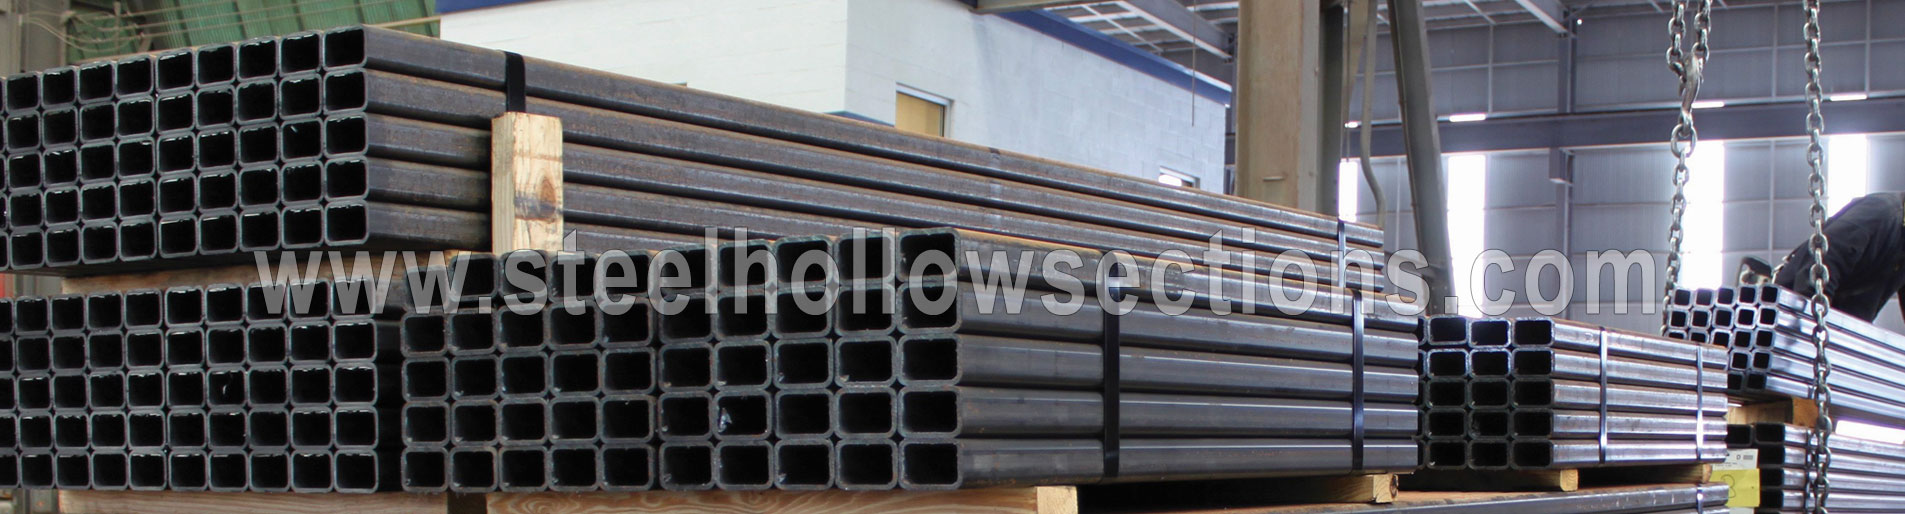 Hollow Section Square Pipe Suppliers Dealers Distributors